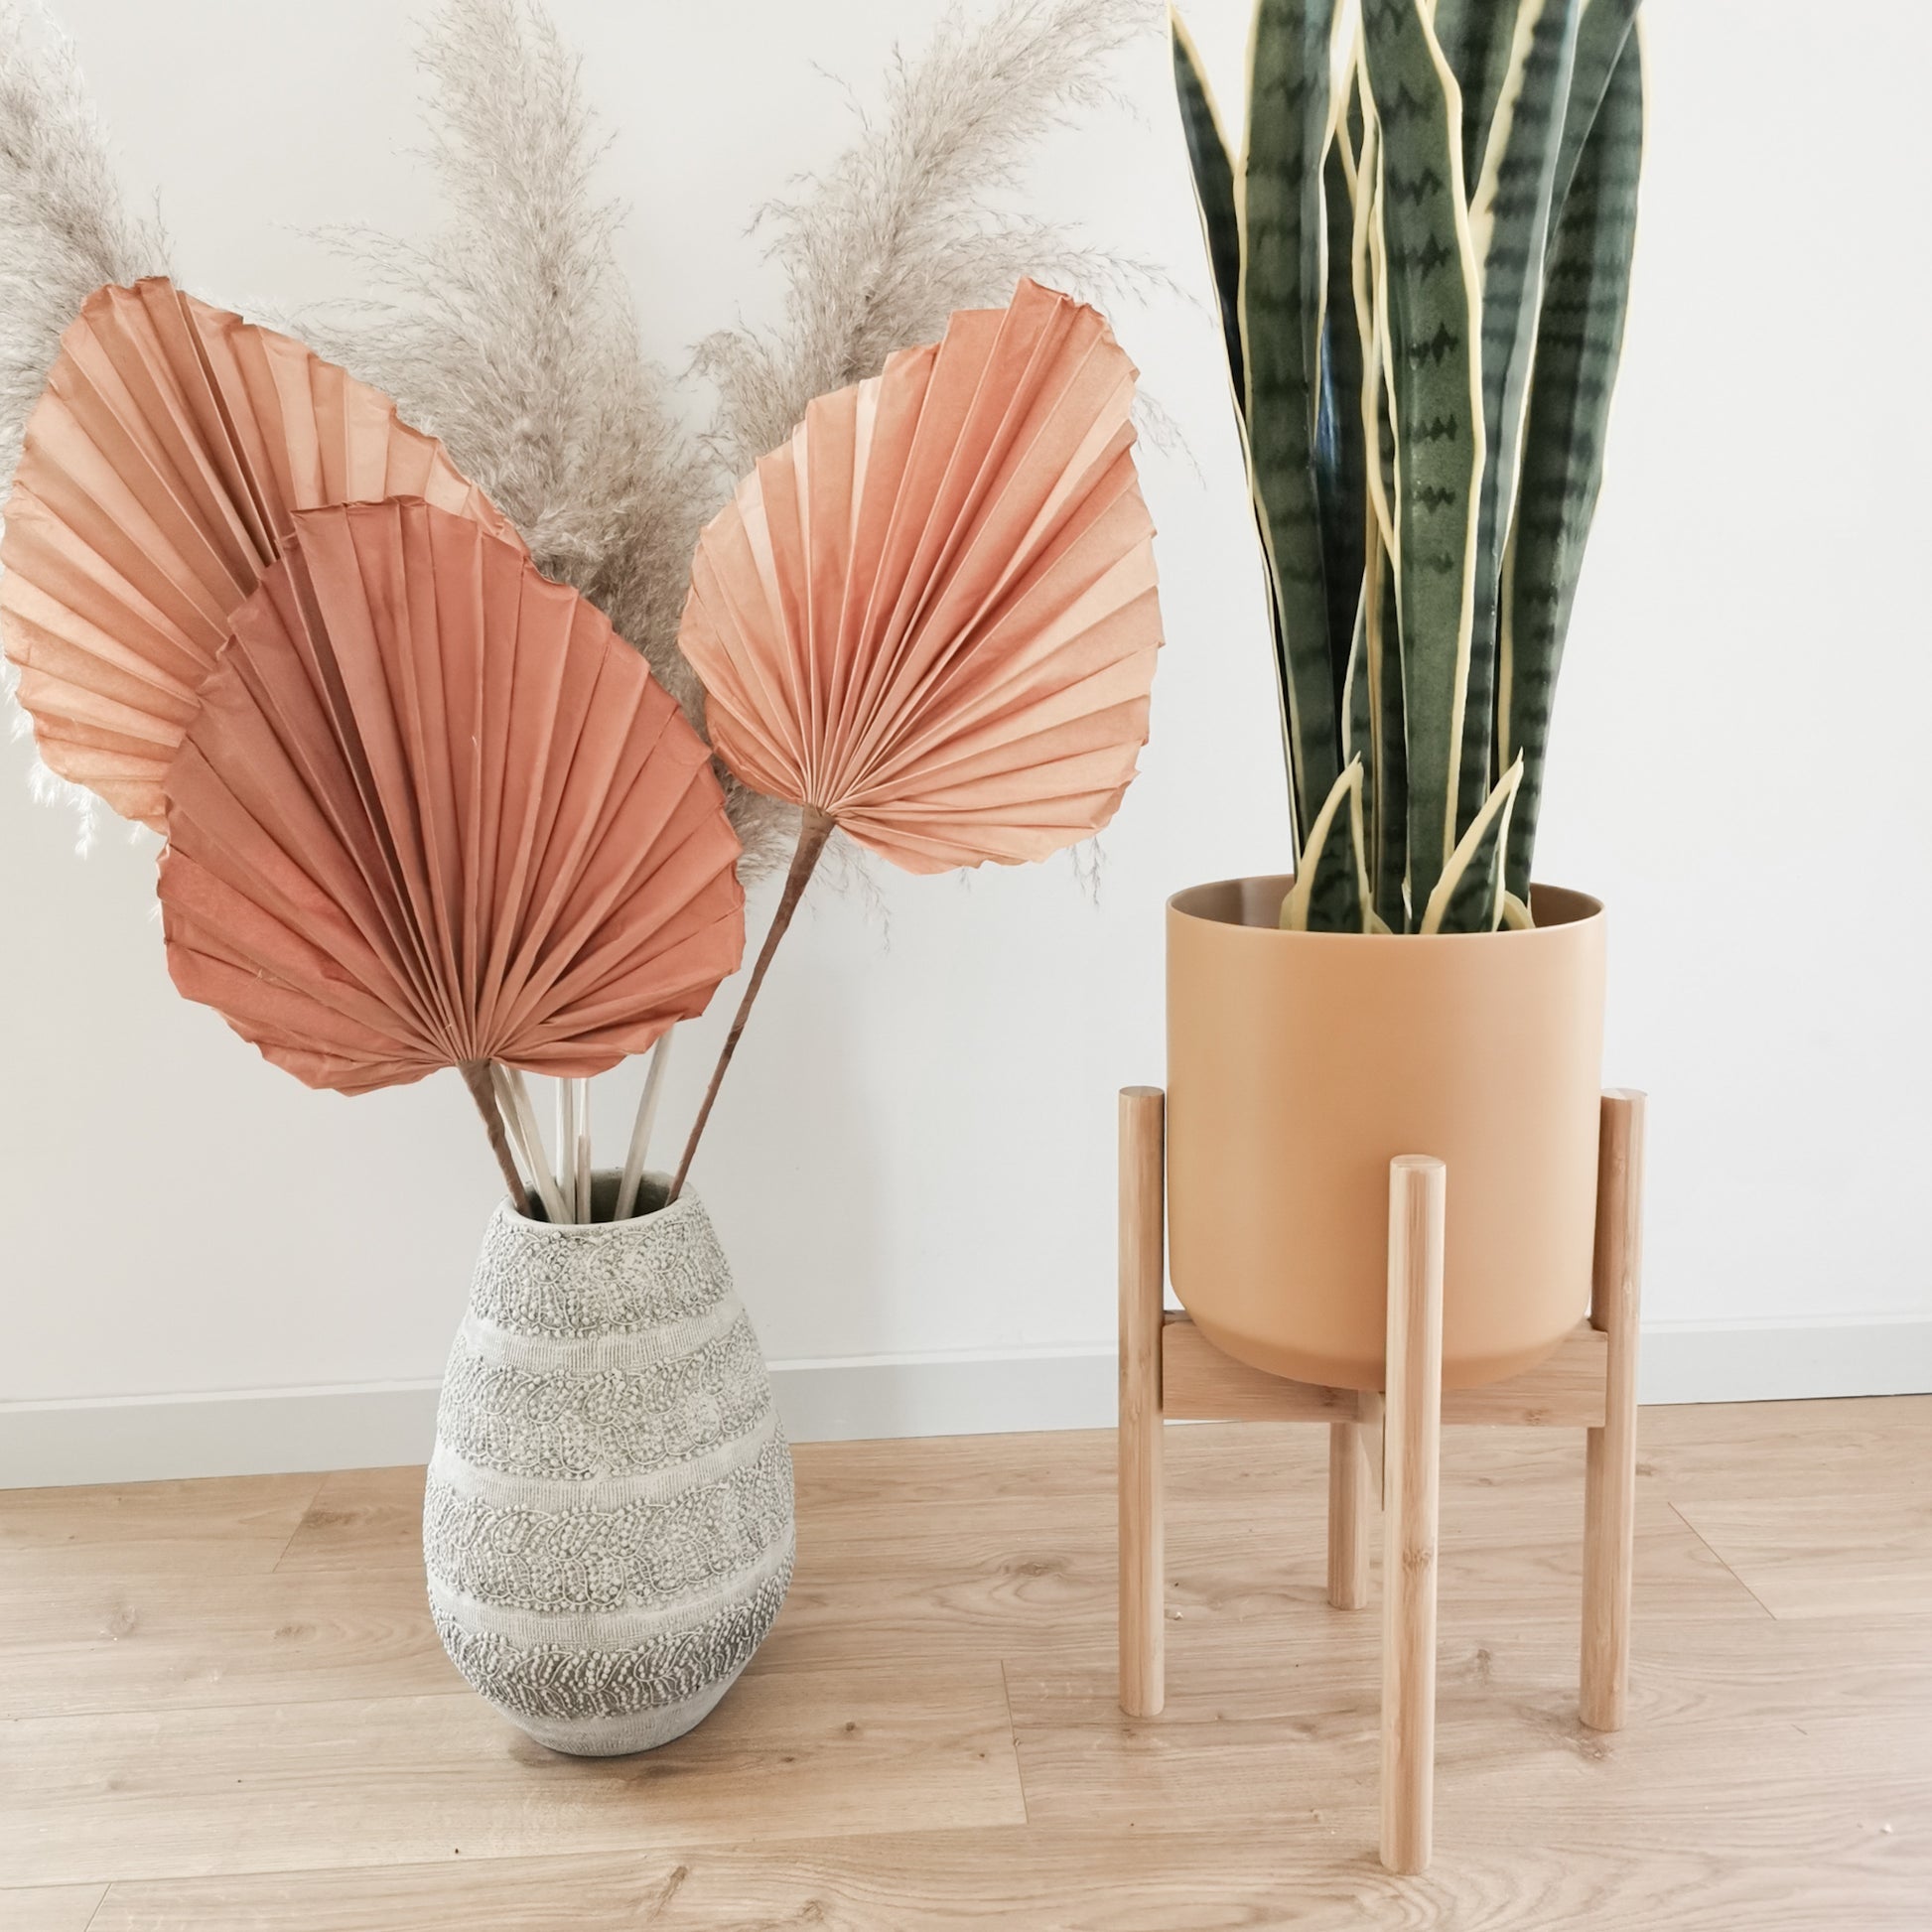 Bamboo indoor plant stand inspired by mid-century modern design. Perfect for different pot sizes and plants.